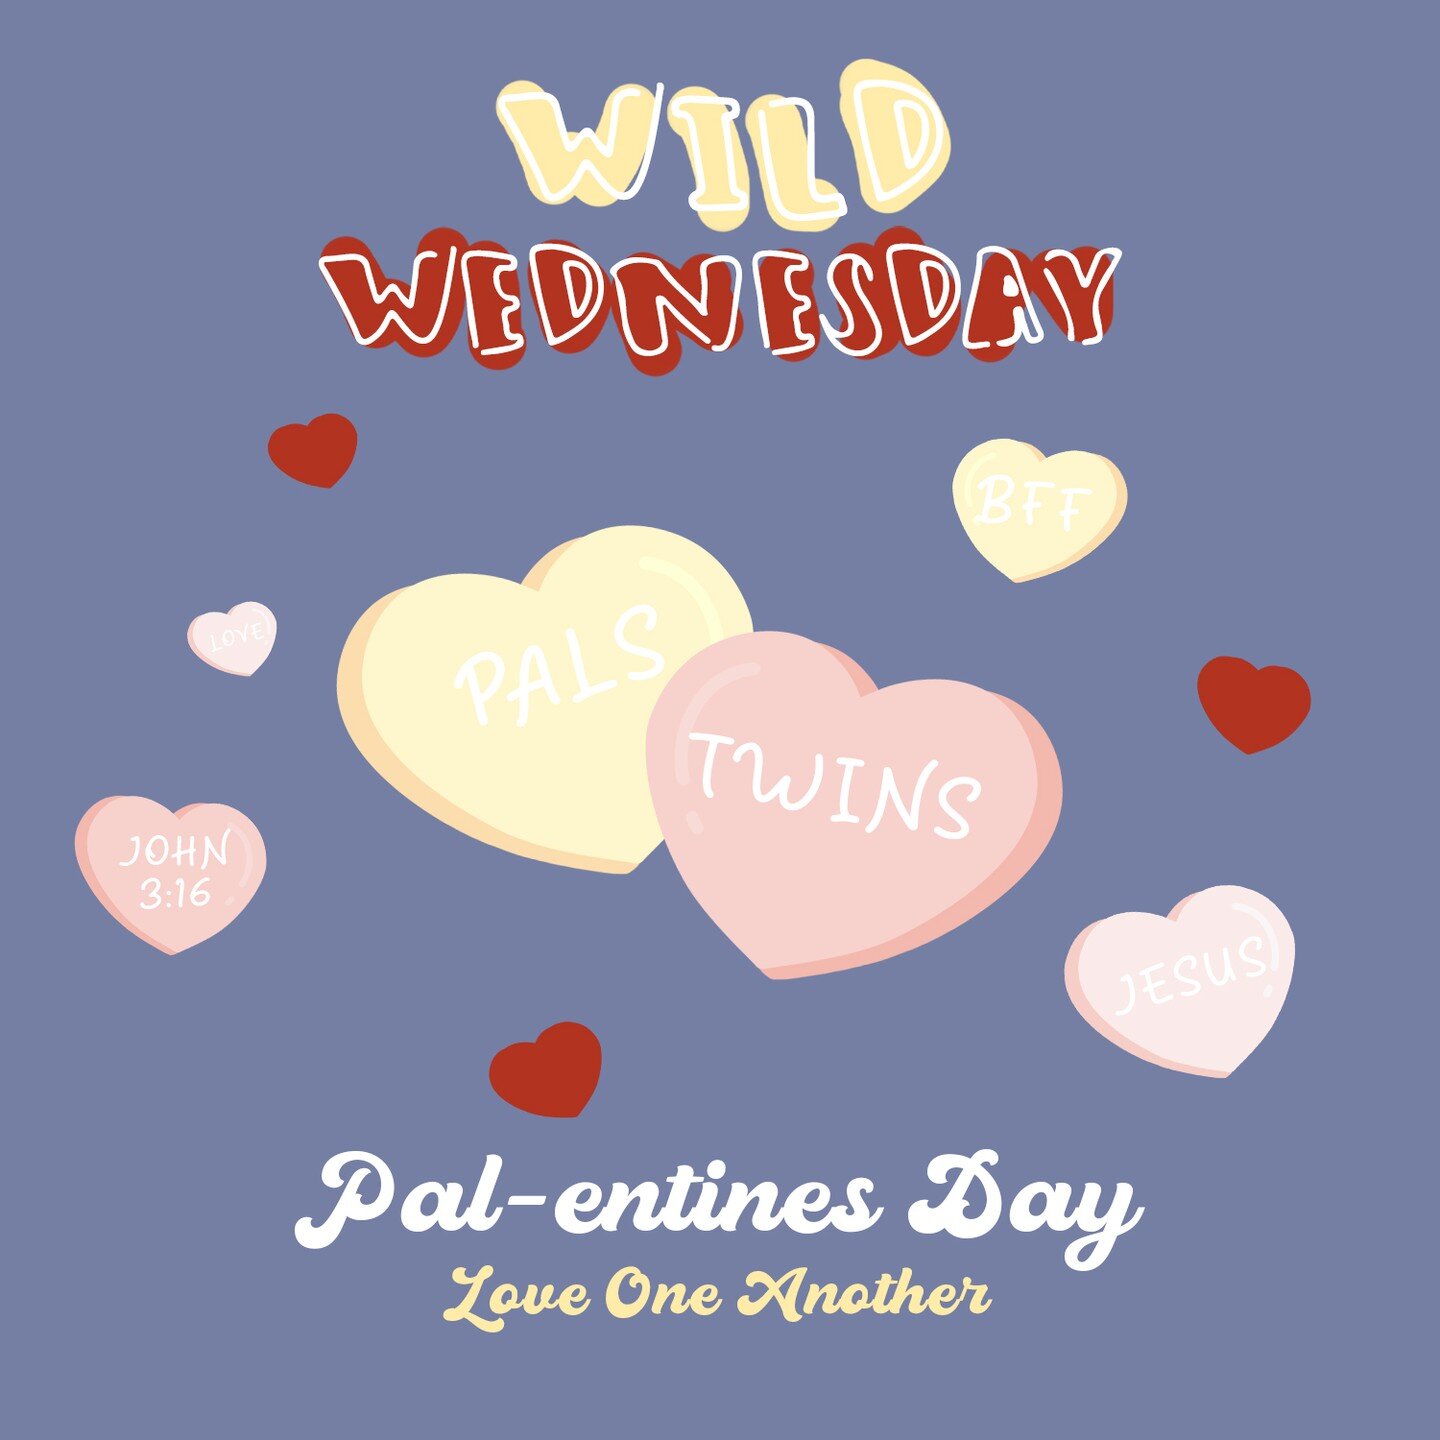 Our next Wild Wednesday is on February 28th! We hope your students can join us for this fun-filled night of worship, reading the Word, and dressing up as twins with their best pals! This will be during our midweek service, beginning at 7 PM!